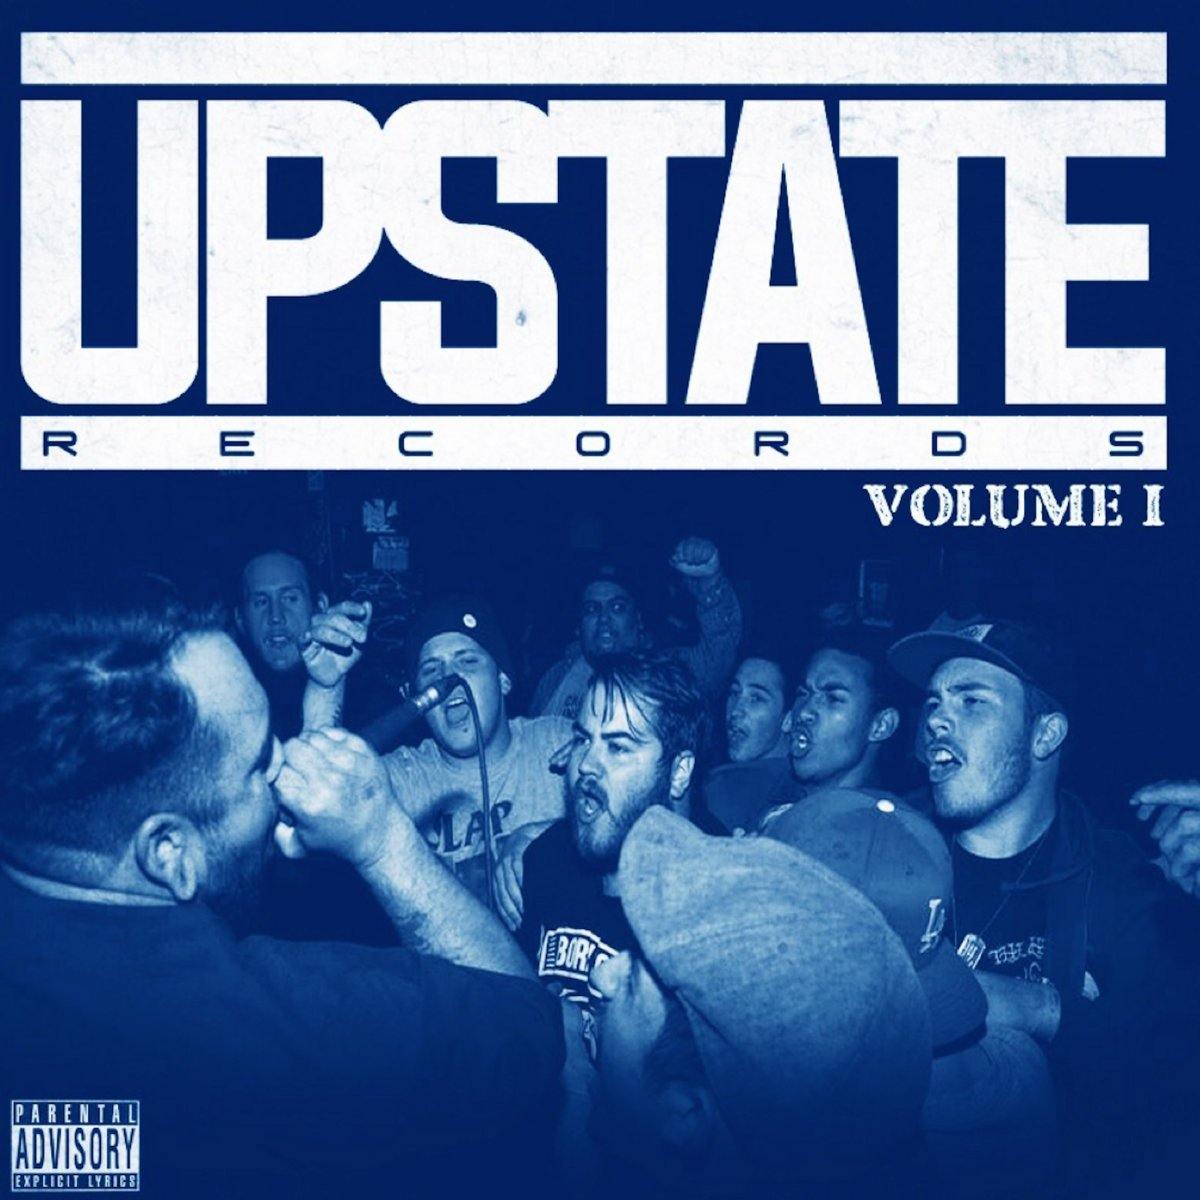 Buy – Upstate Comp "Volume 1" CD – Band & Music Merch – Cold Cuts Merch